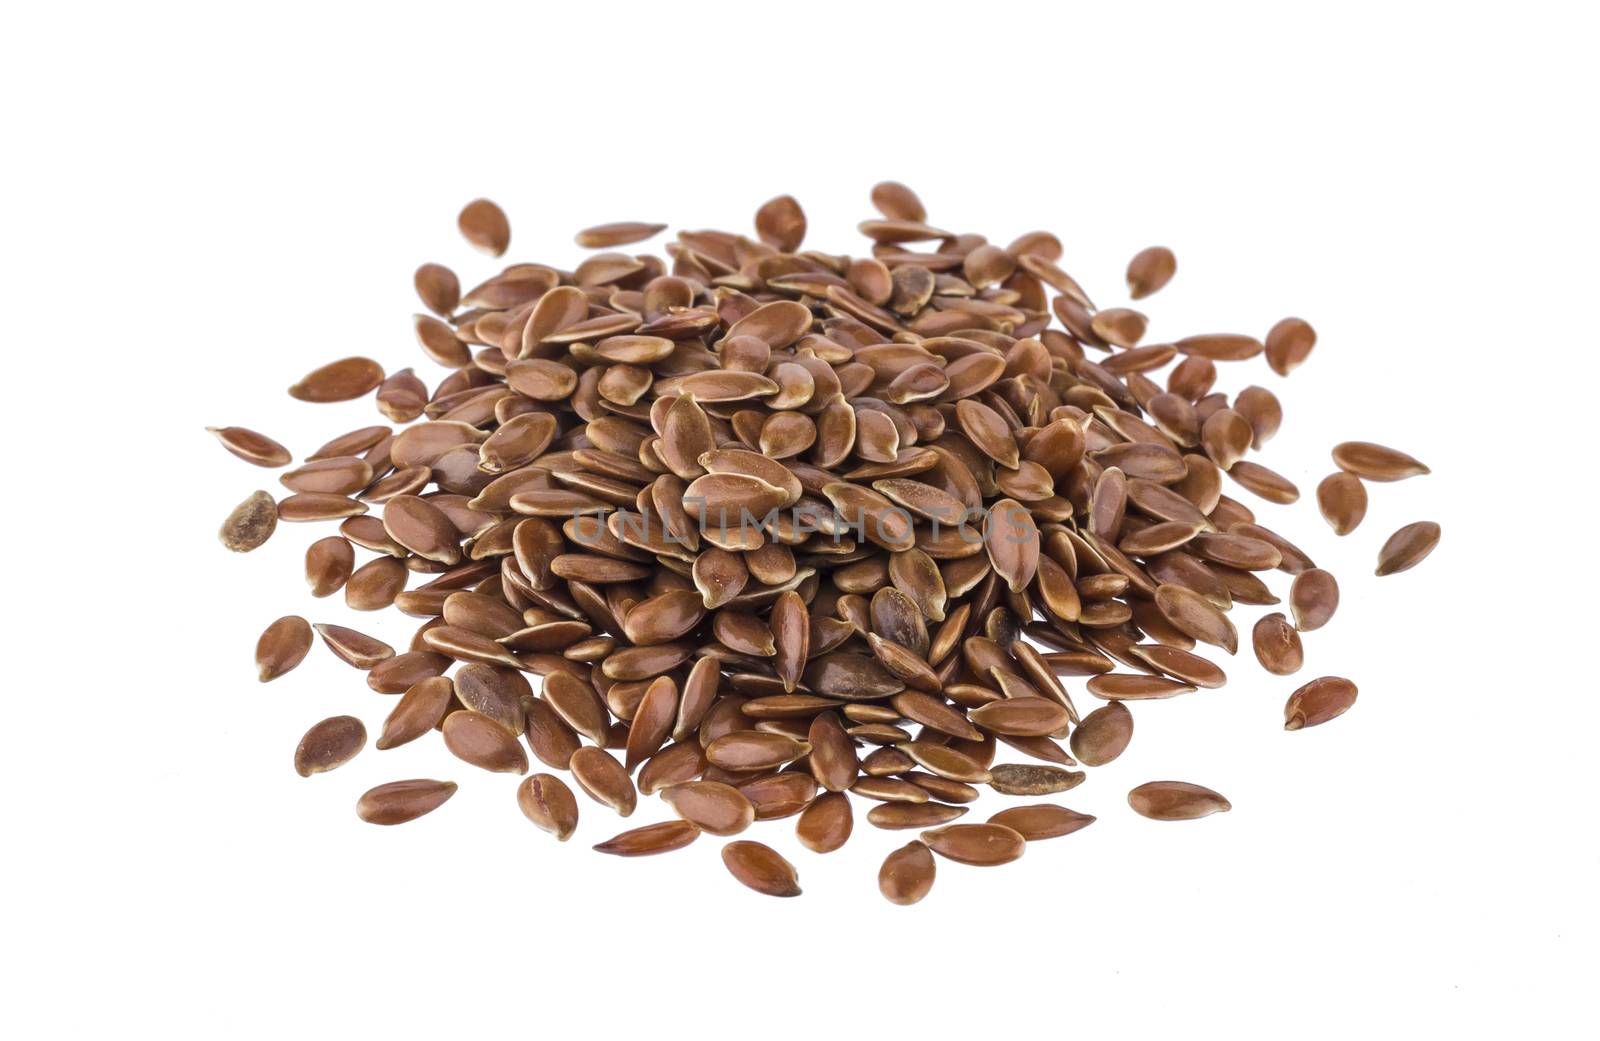 Pile of flax seeds isolated on white background close-up